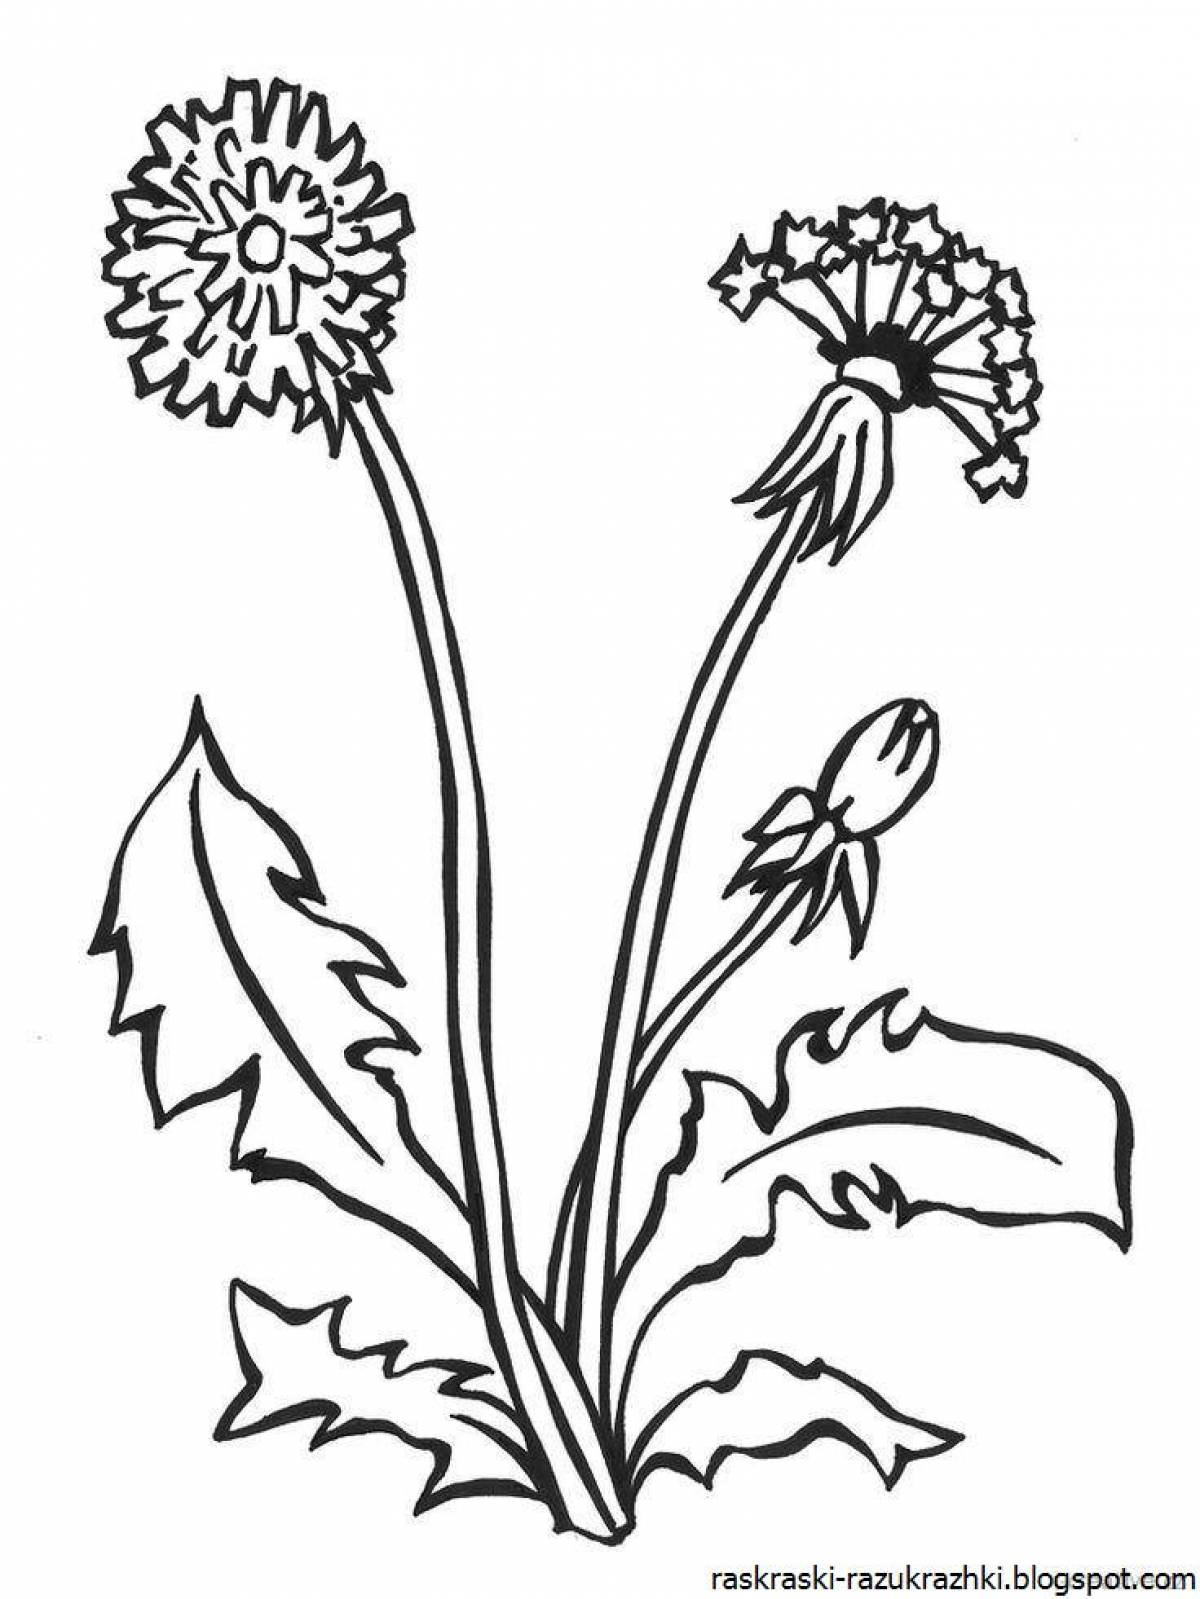 A lovely dandelion coloring book